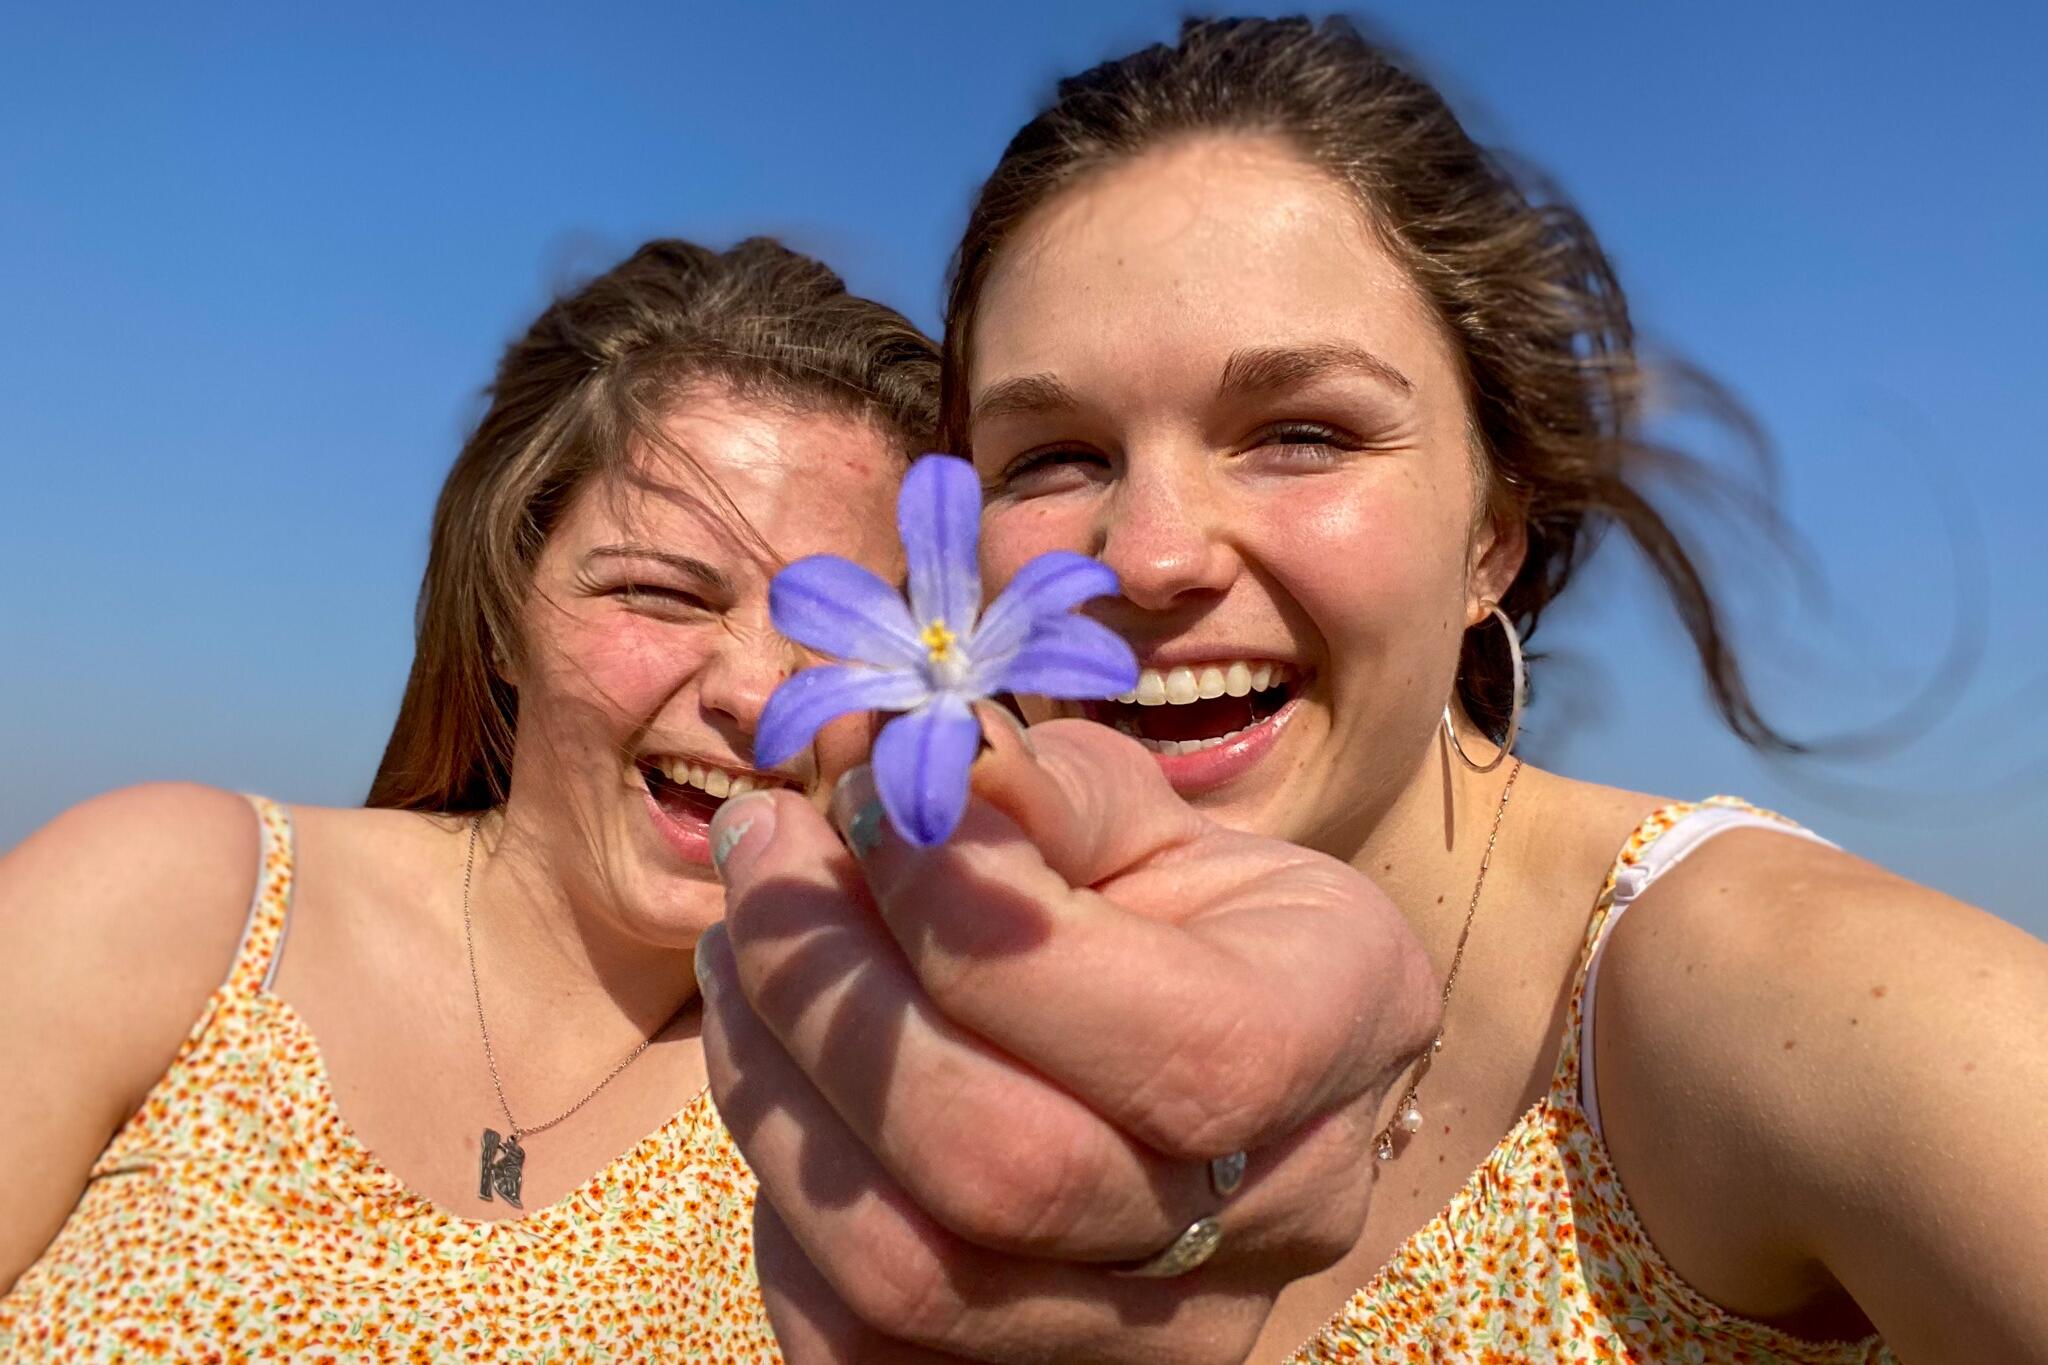 Sisters, Jamie and Jennie, smile together while holding out a small, purple flower. 